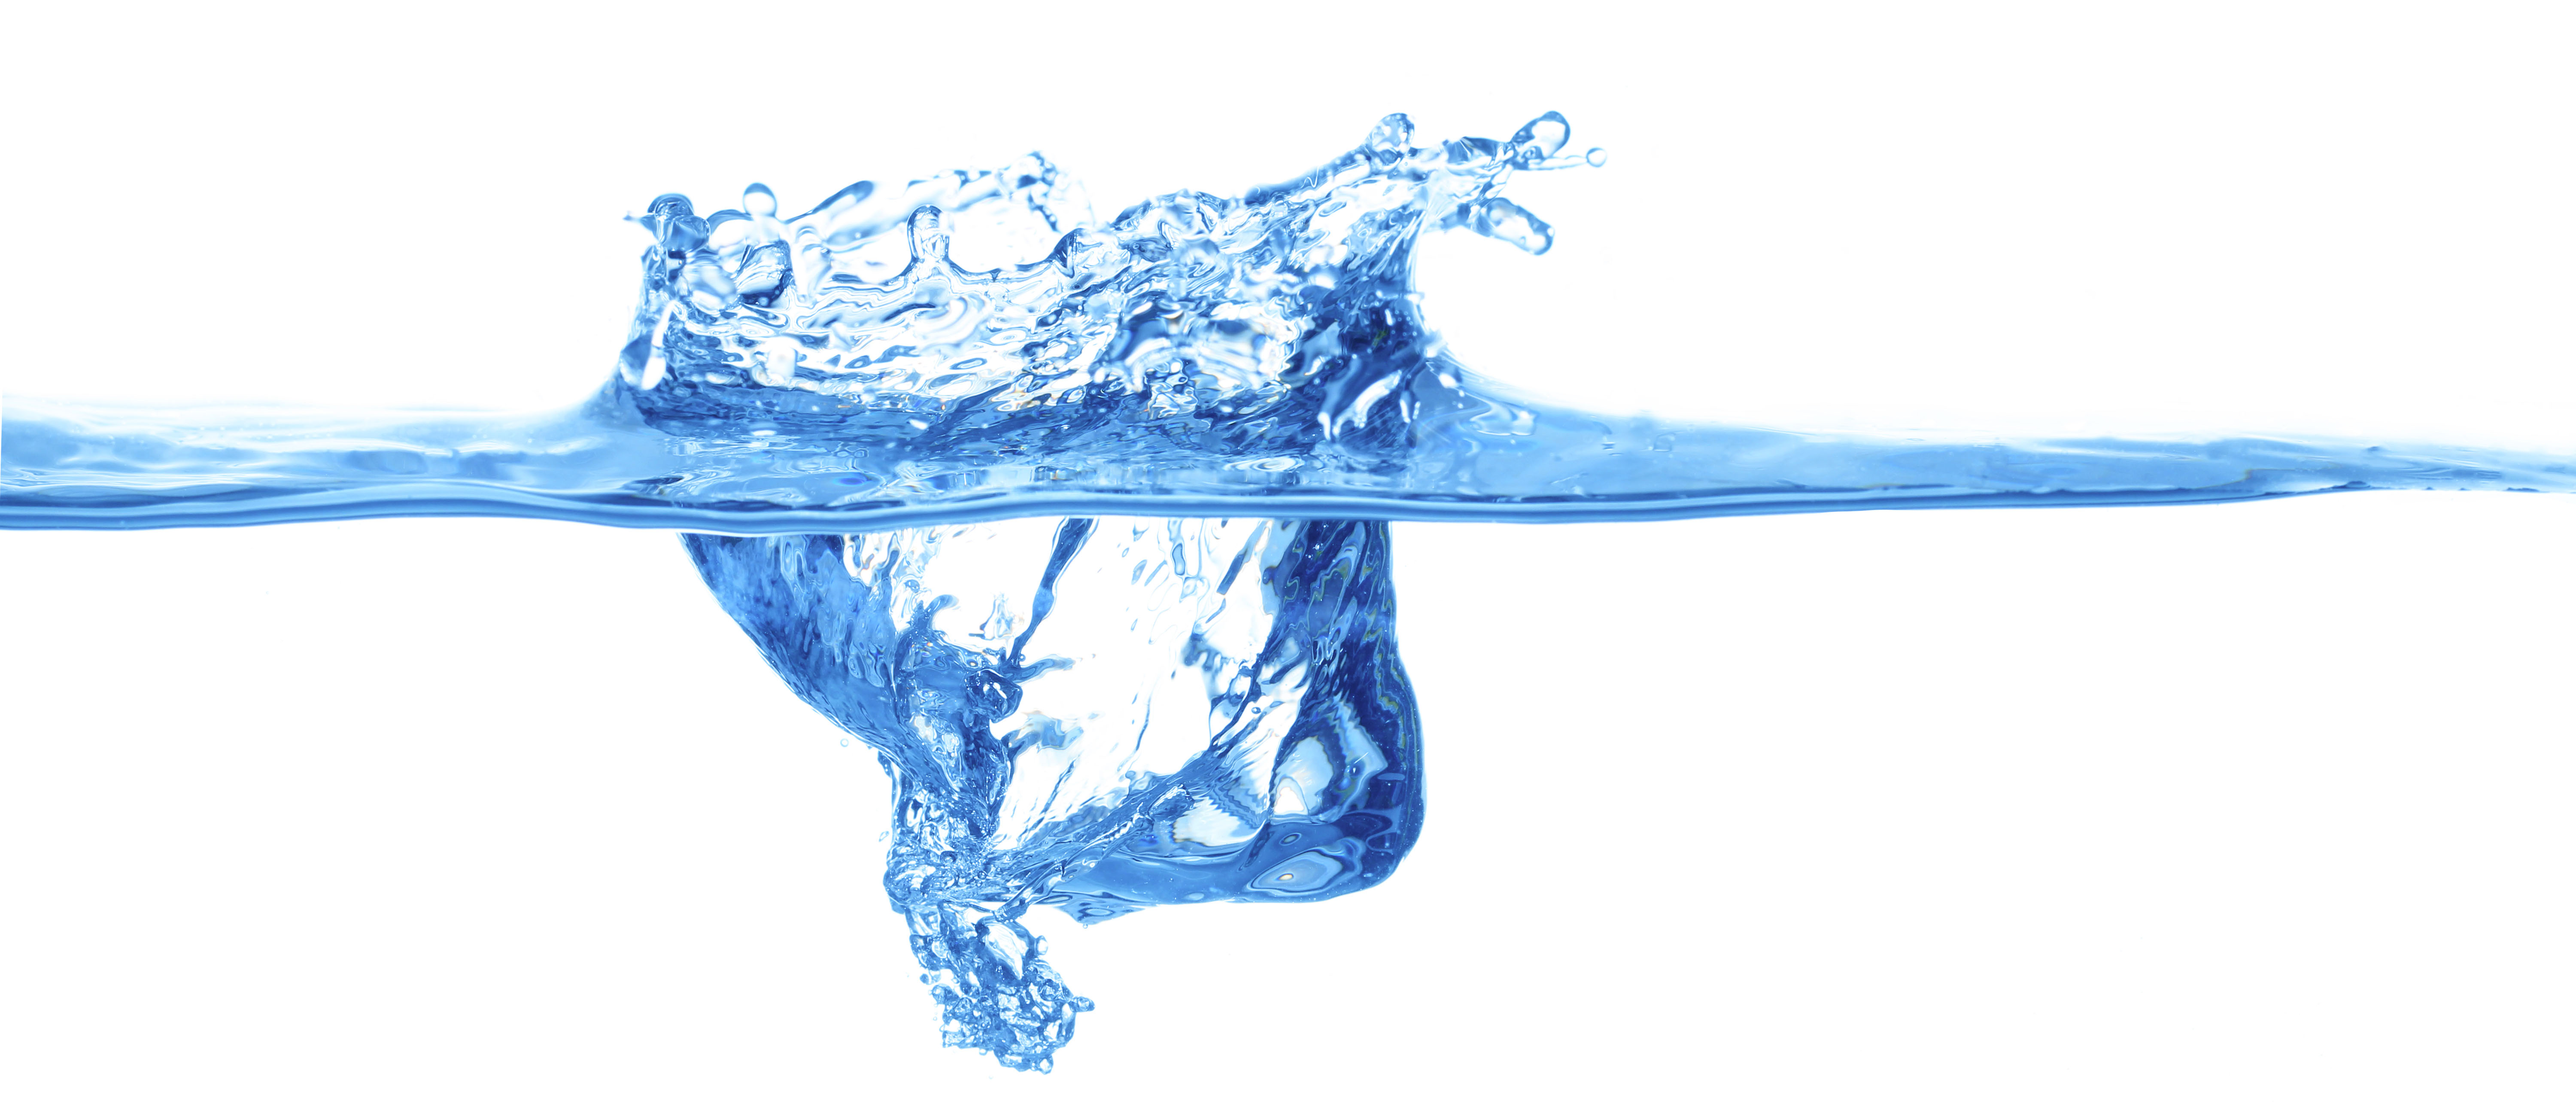 Nourish Goals Blog The Vital Role of Hydration in Health